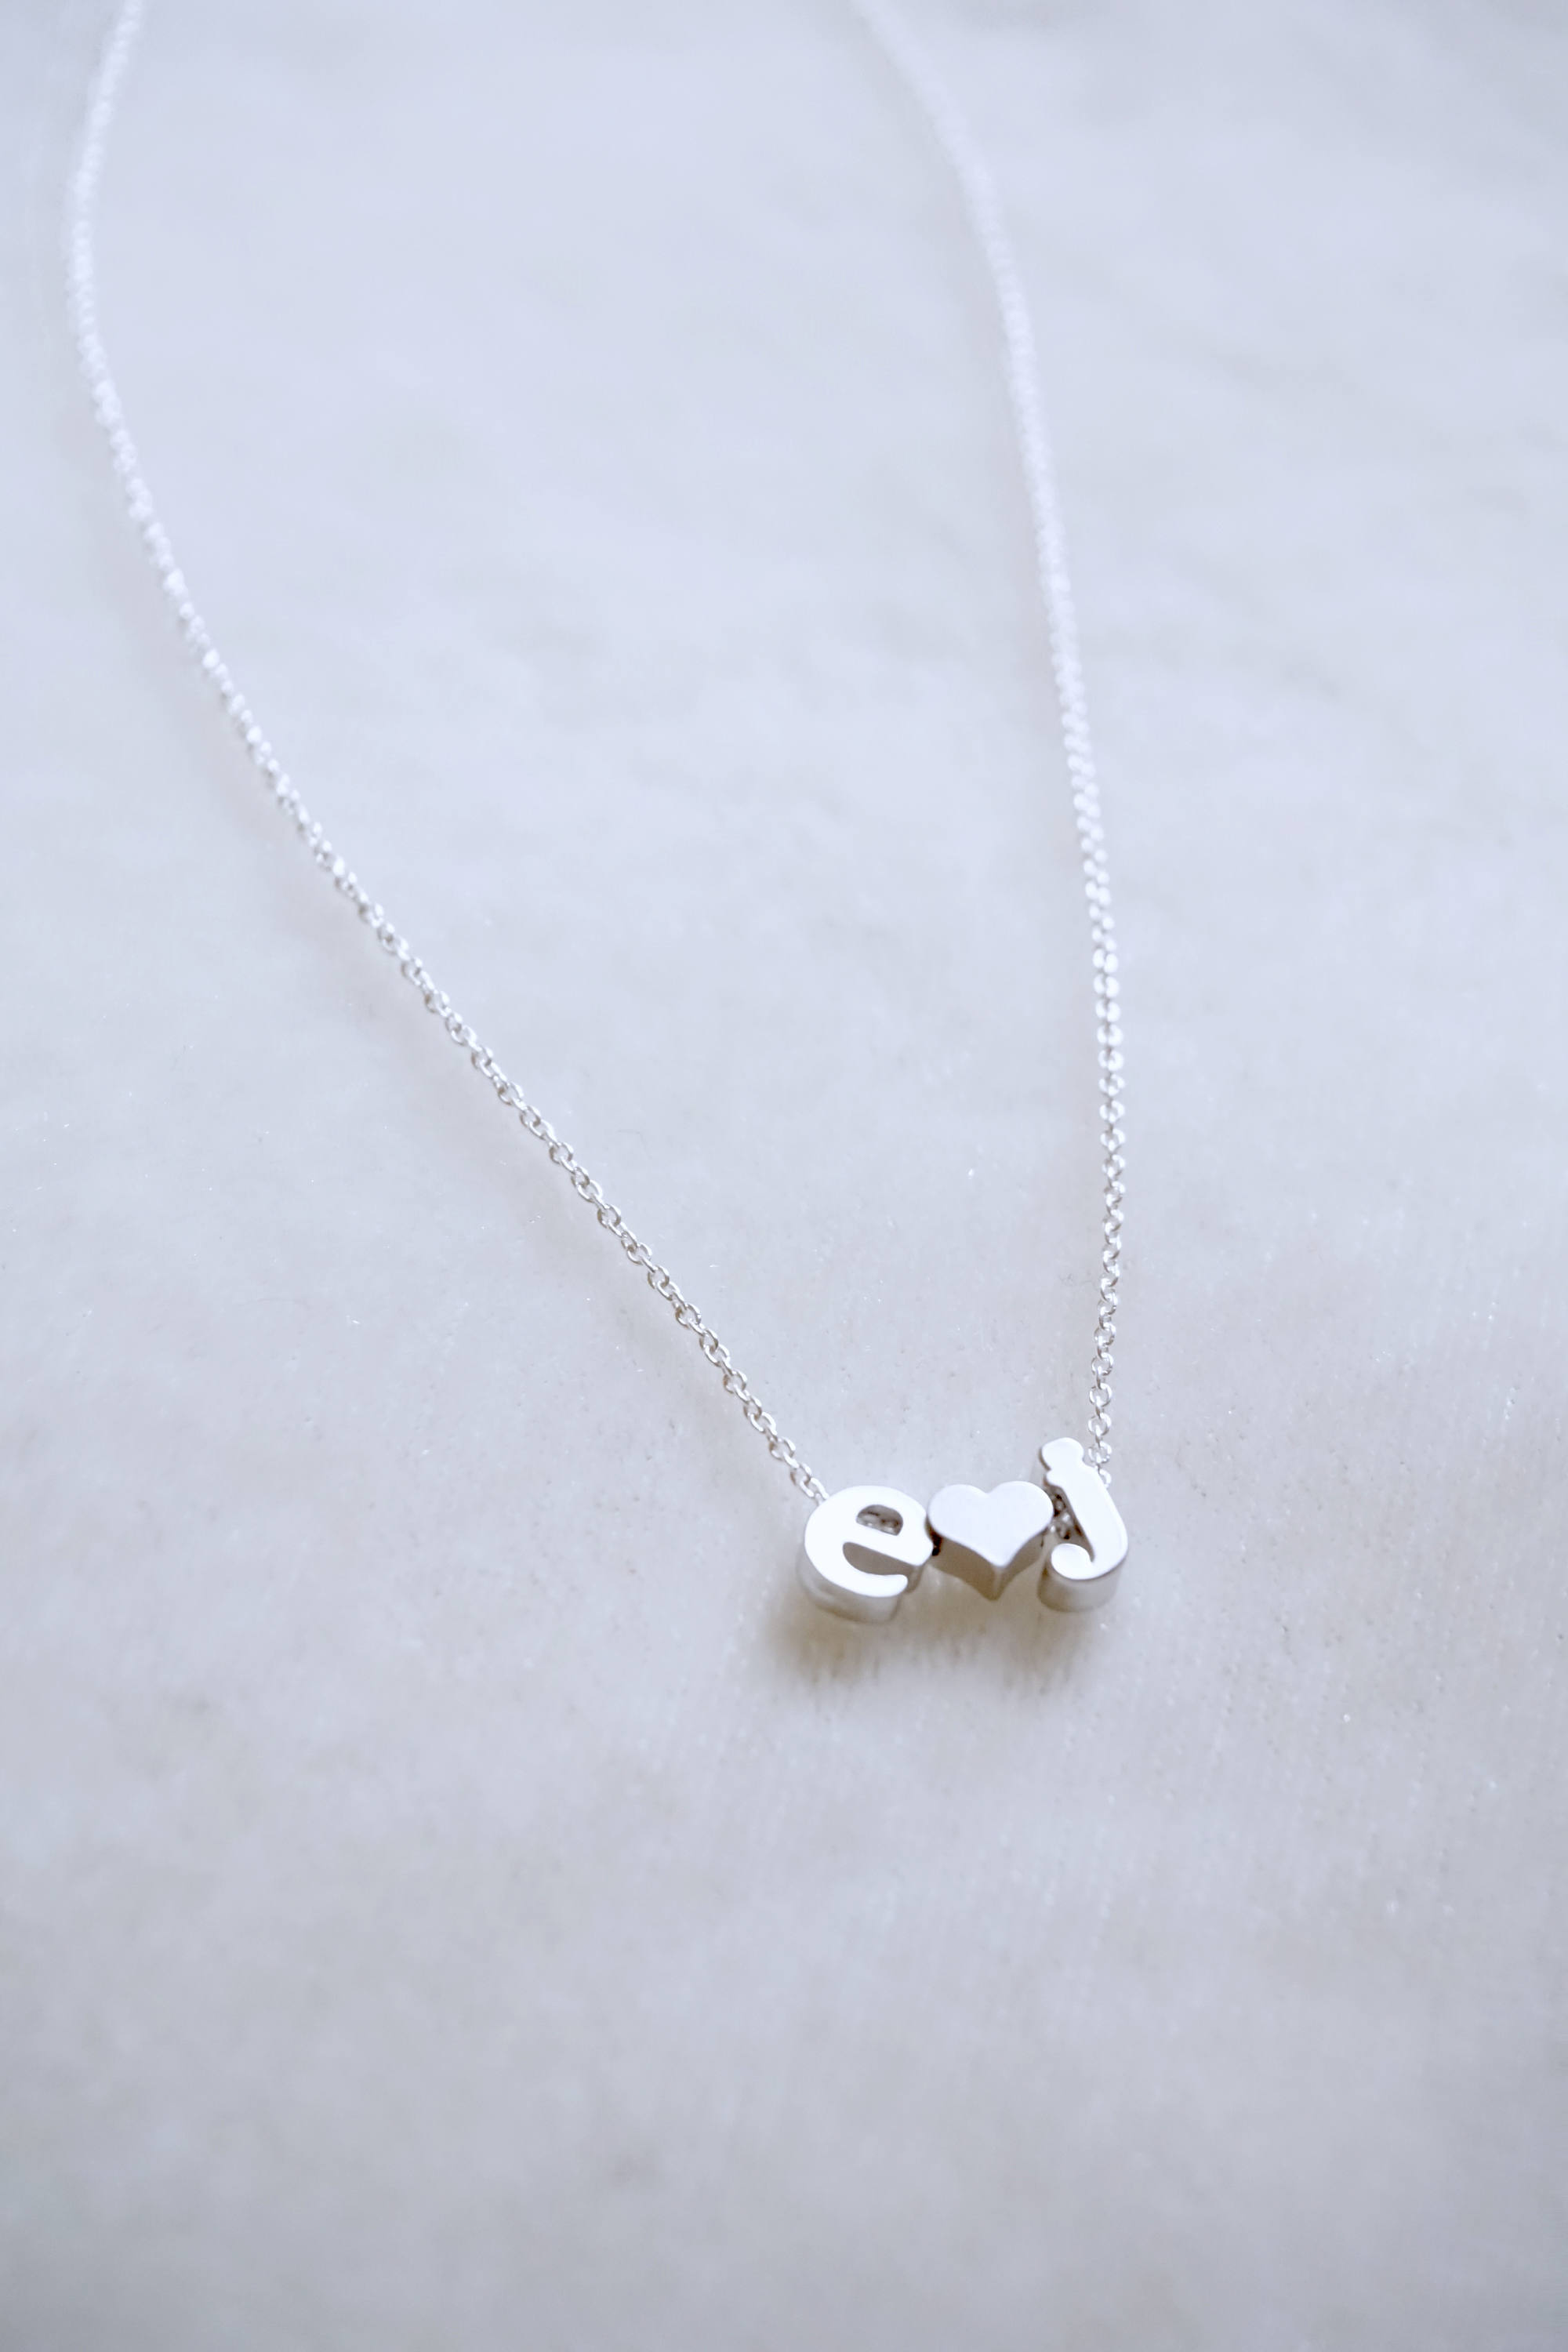 Details about   Couples Initials Necklace Personalized Hand Stamped Anchor Anniversary Wedding 